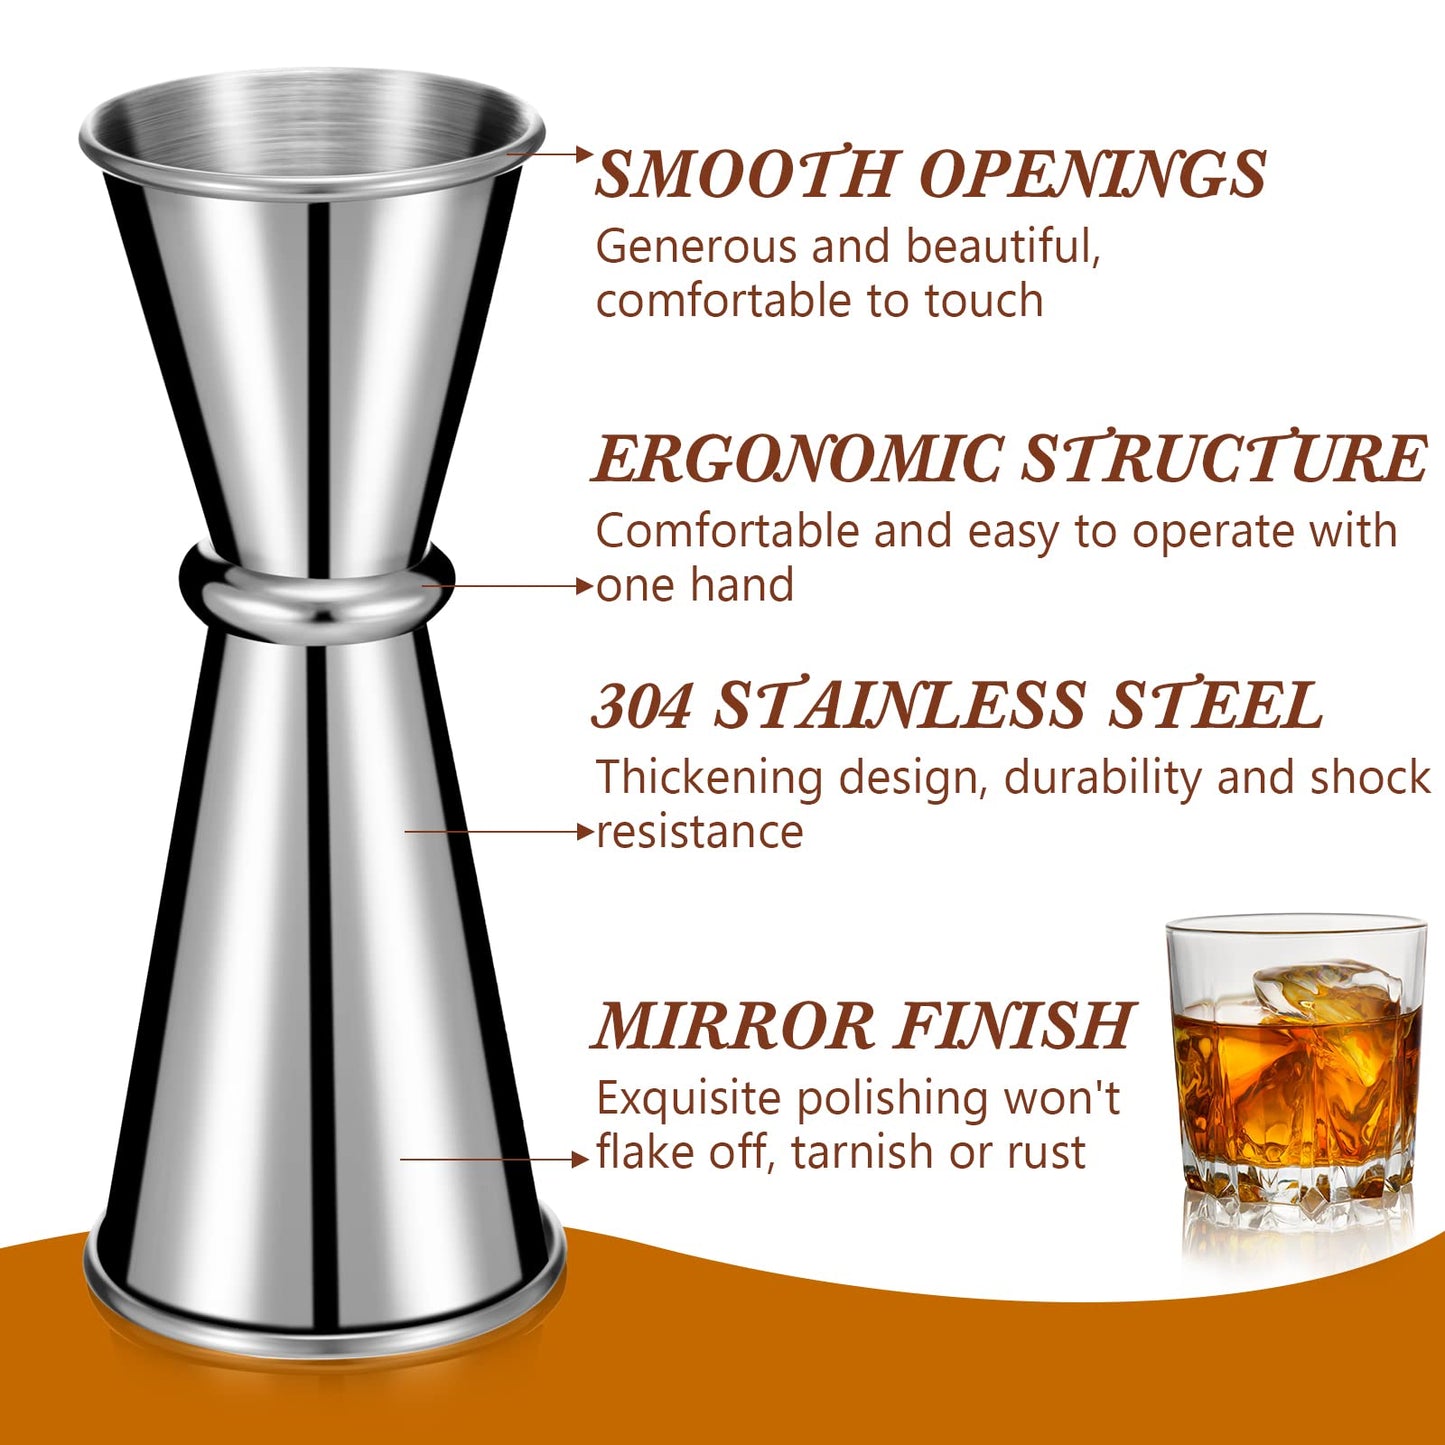 6 Pieces Jigger for Bartending Double Cocktail Japanese Jigger 2 oz 1 oz Stainless Steel Shot Glass Measuring Cup for Home Bar Drink Kitchen Bartender Tools